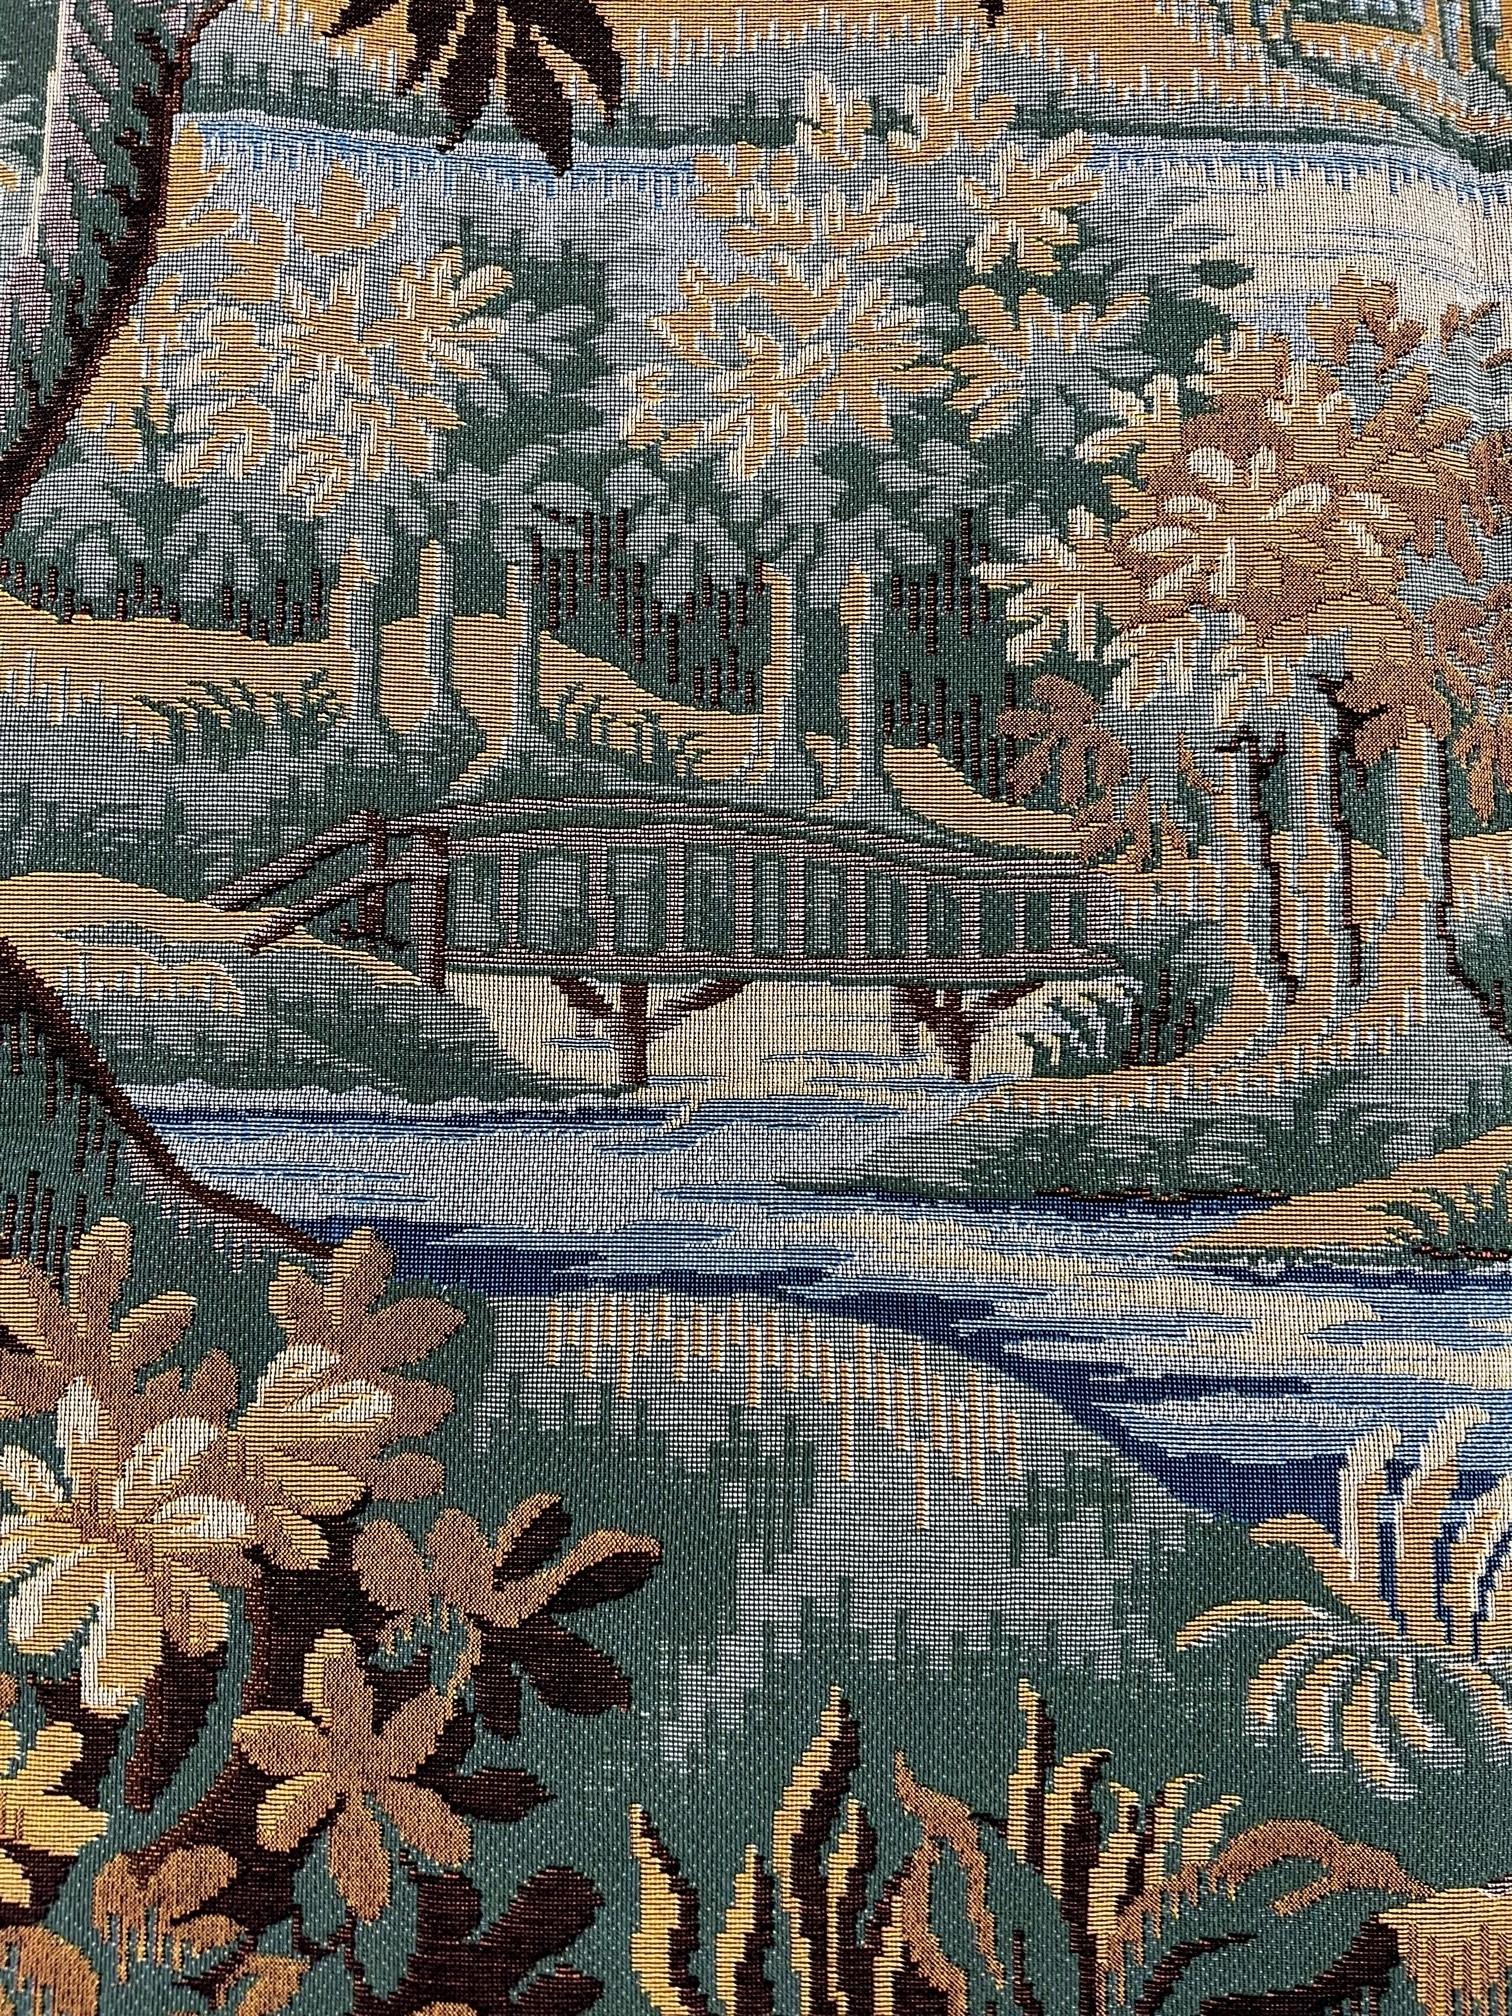 In the 17th Century, landscapes with trees, birds and rivers were popular, and often included architectural features.  Plants and flowers of the time are represented. This tapestry is French made,  Jacquard woven with relief stitch. It is fully